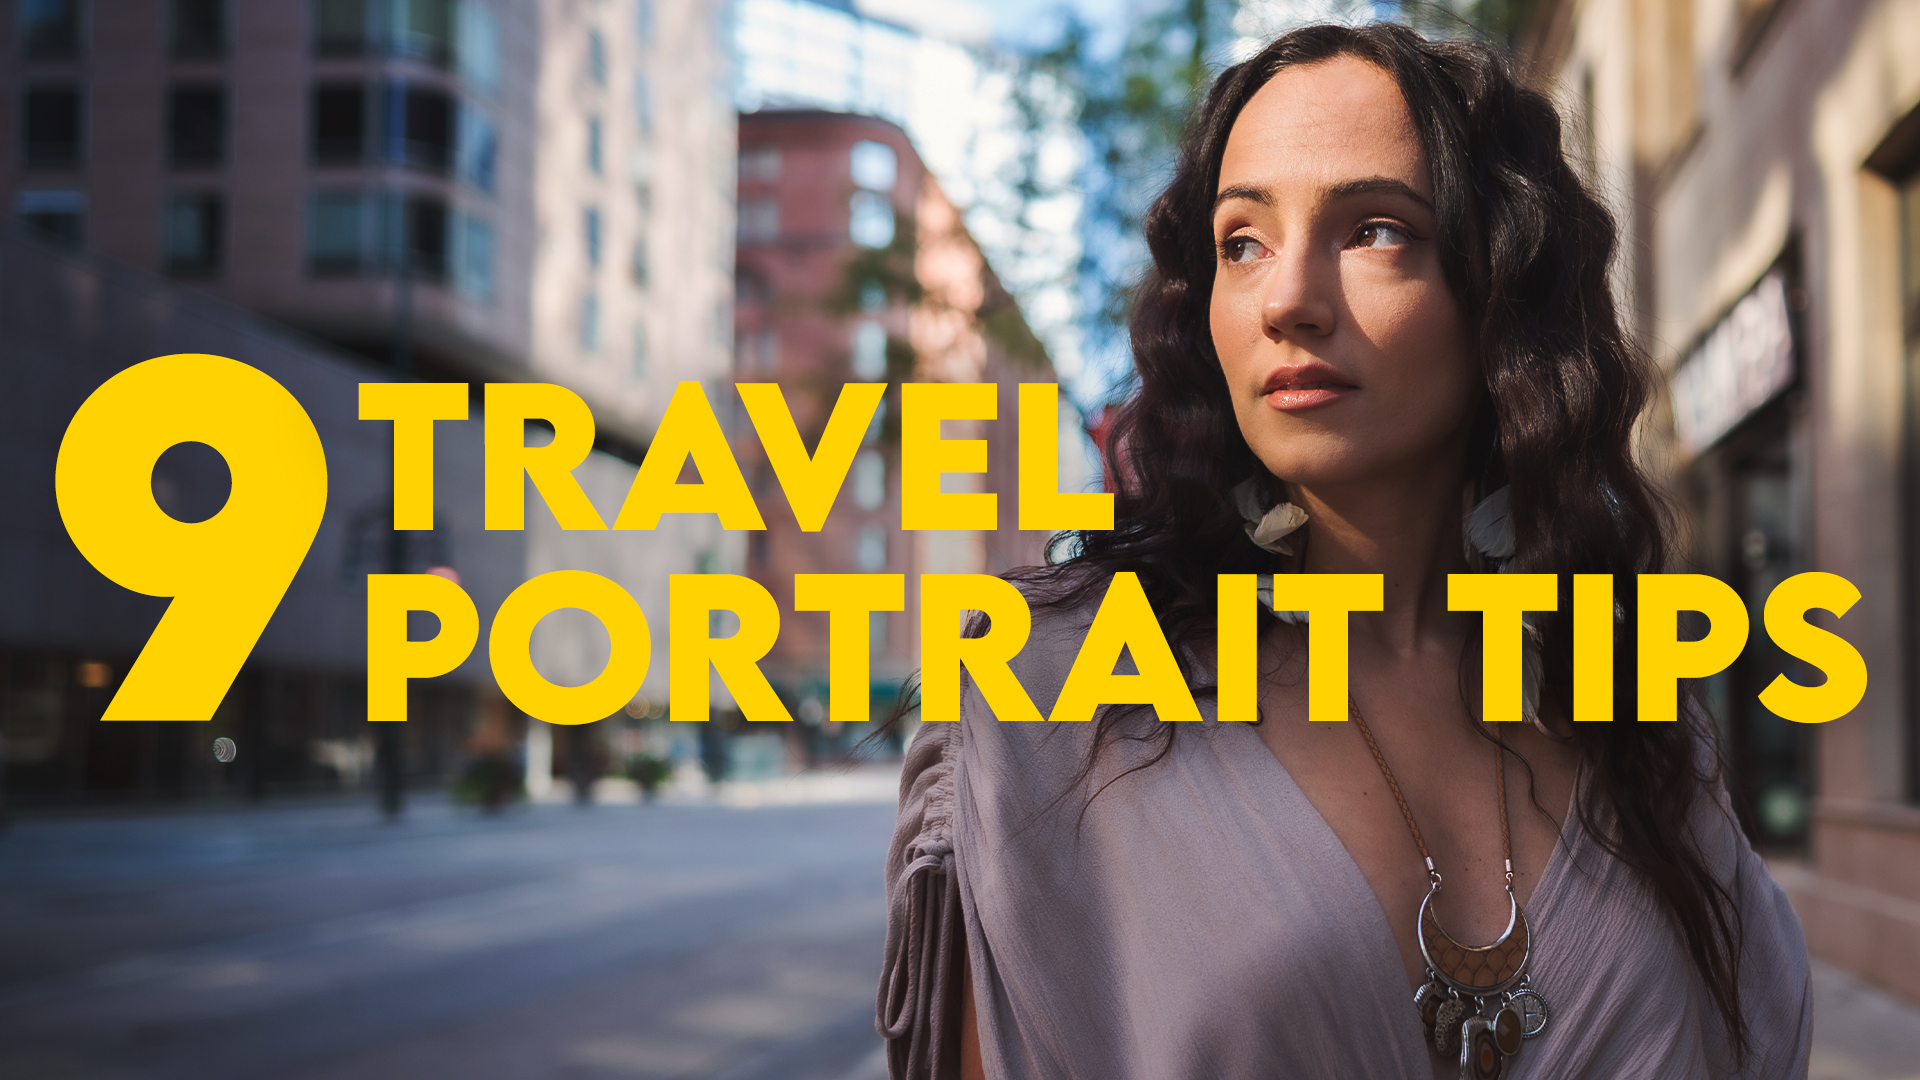 You are currently viewing 9 Portrait Tips for Better Travel Photography